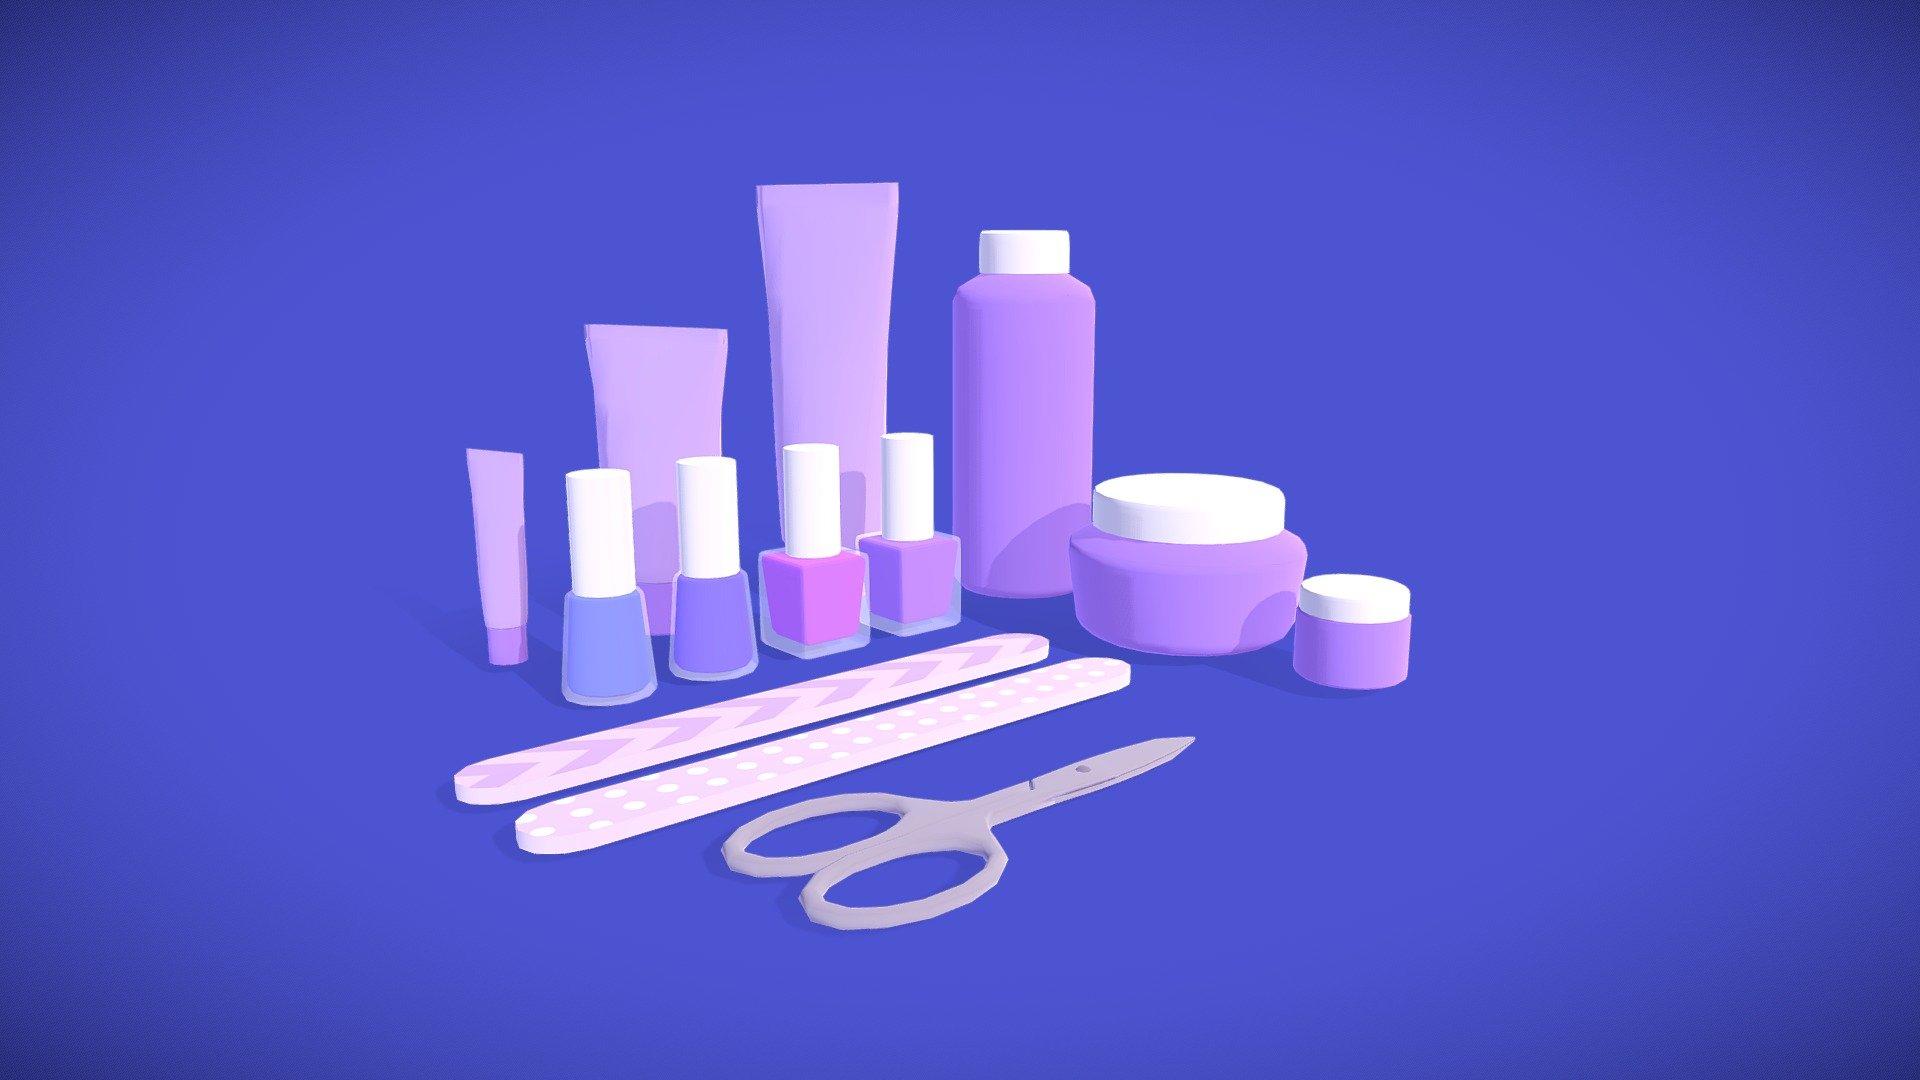 Low Poly skincare set with openable caps and brushes, including 3 texture options for colors. Only uses 2 materials for base color and transparency 3d model